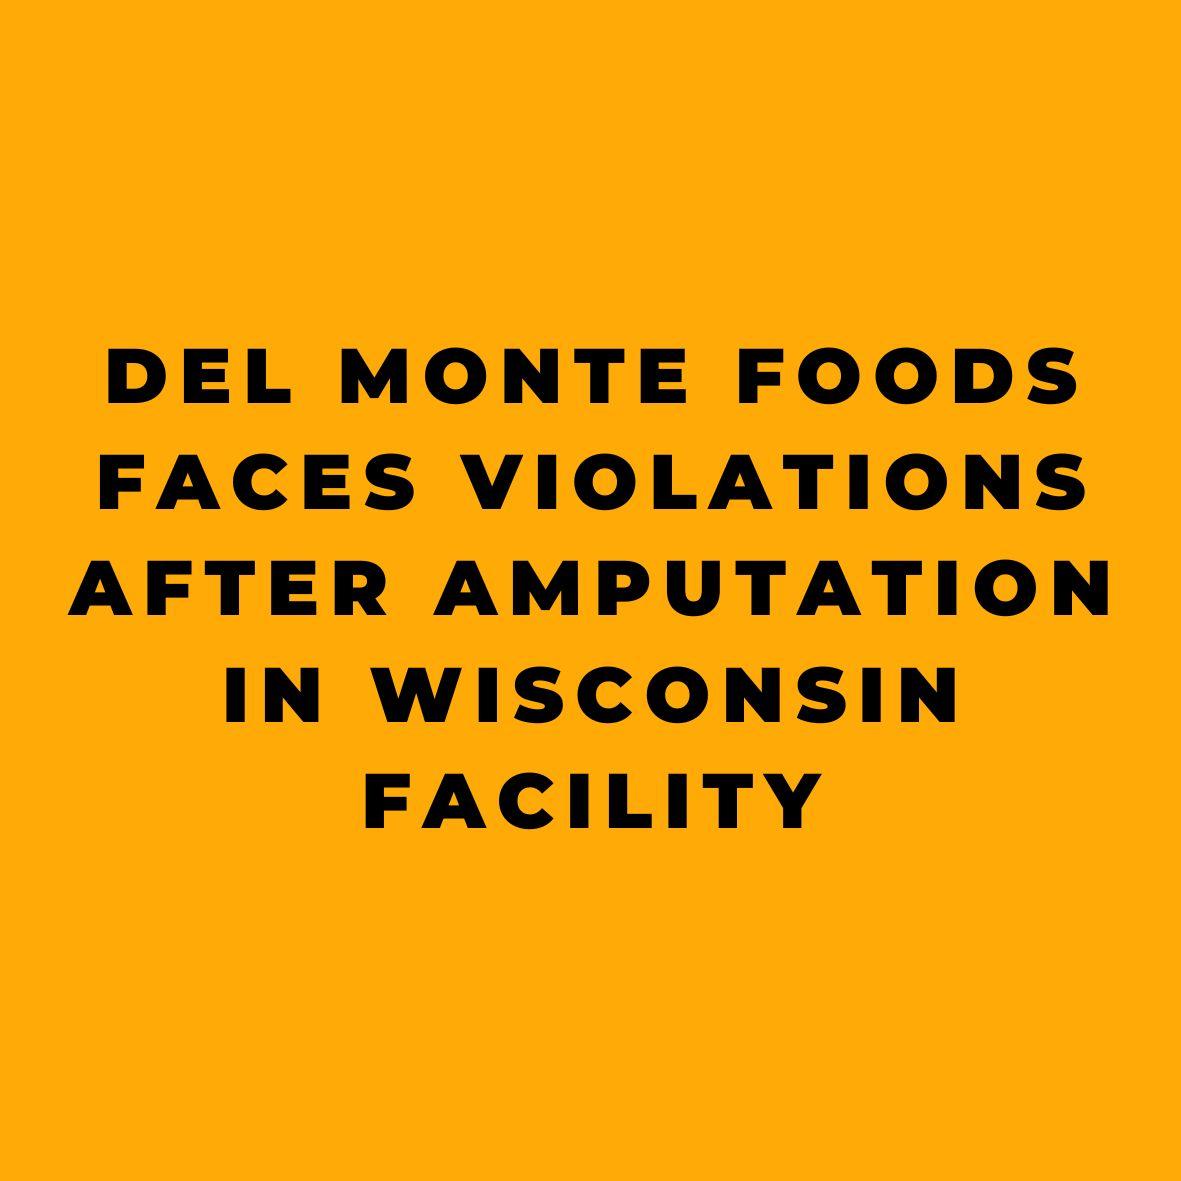 Del Monte Foods Faces Violations After Amputation in Wisconsin Facility